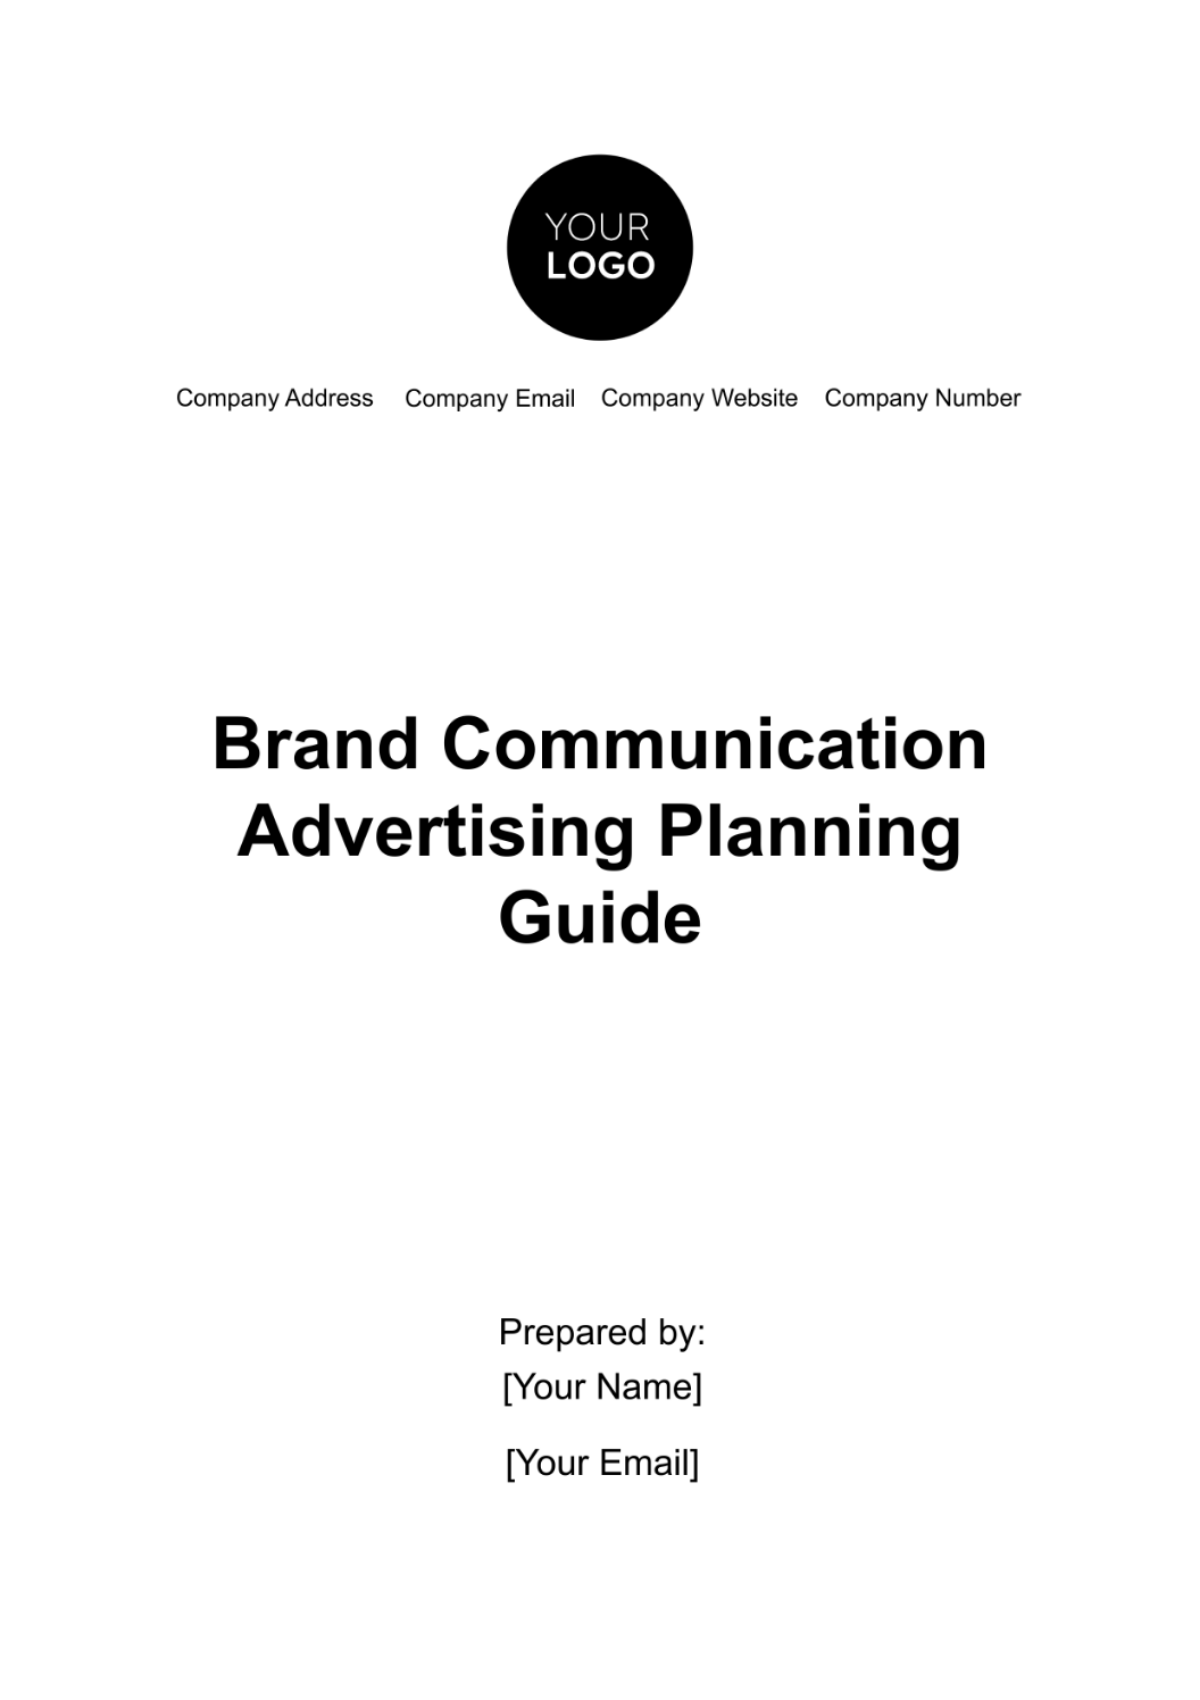 Brand Communication Advertising Planning Guide Template